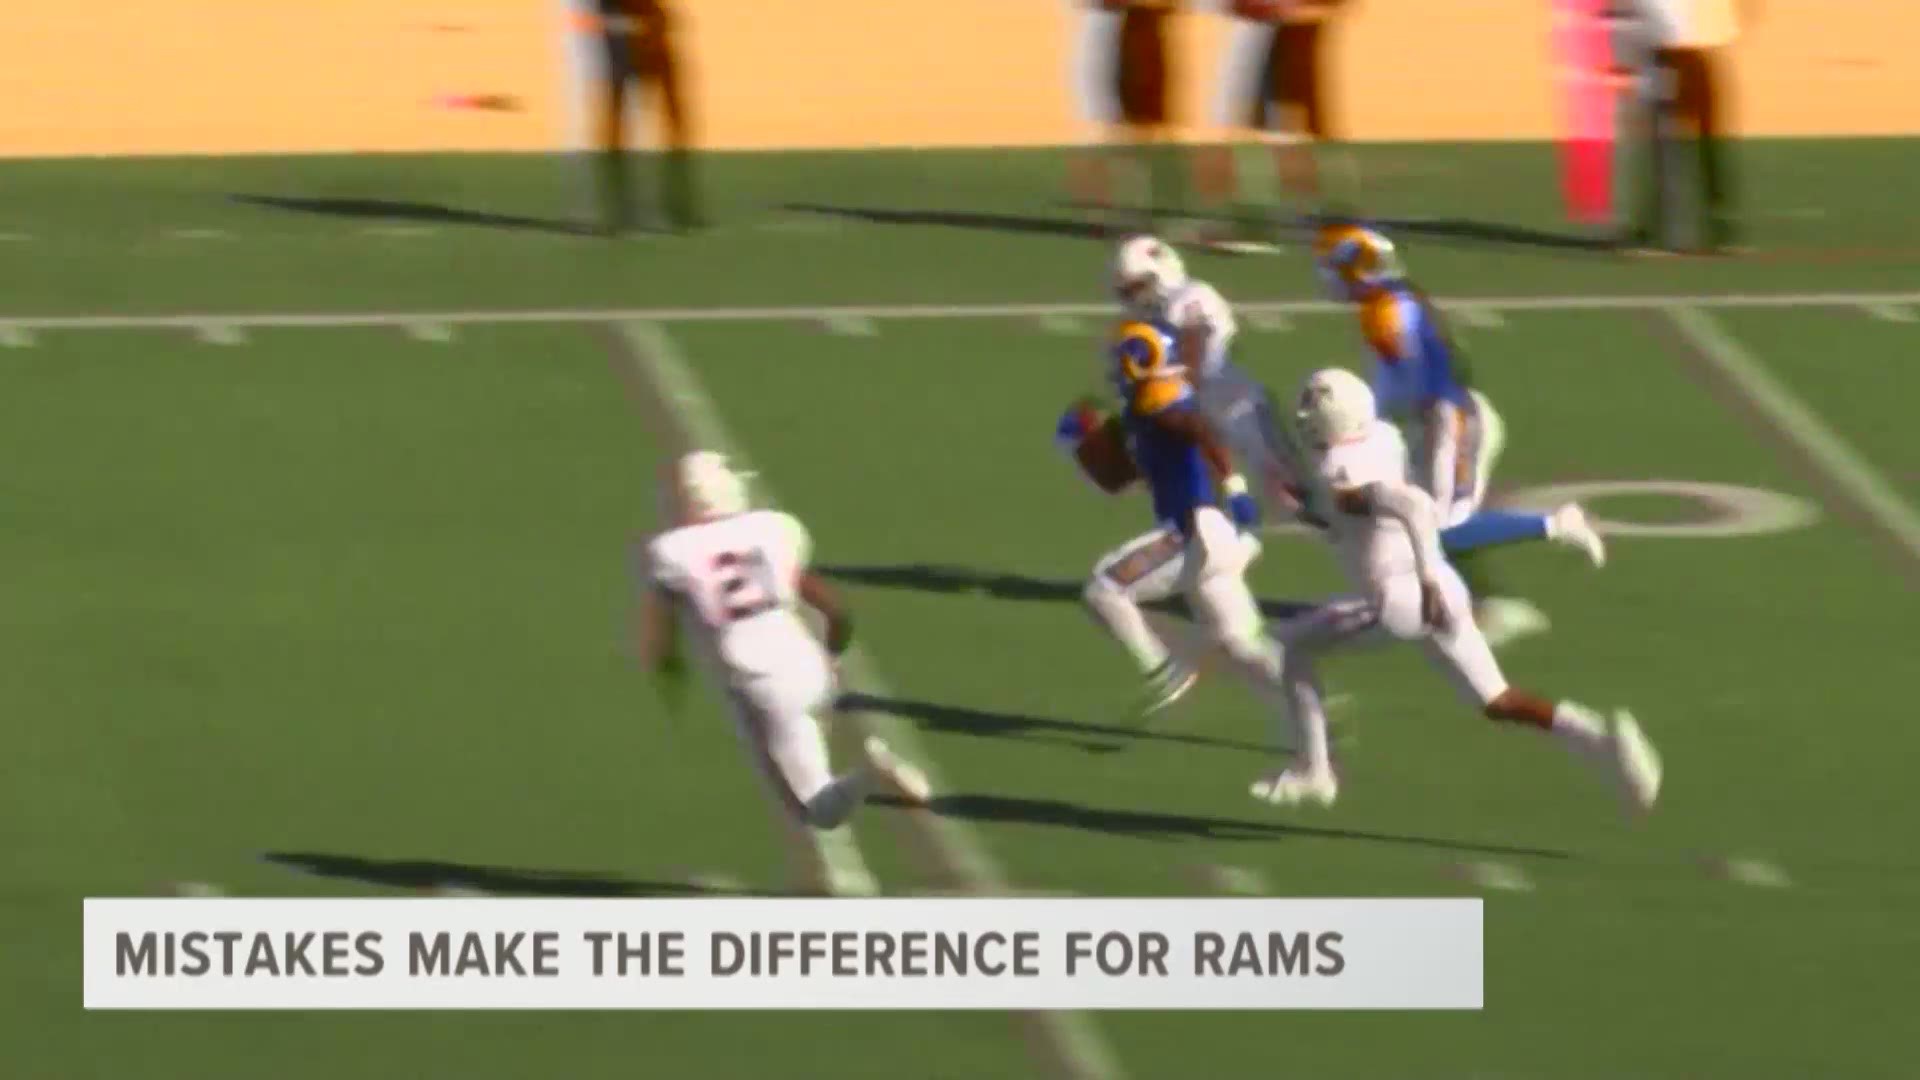 The Rams will take on UT Permian Basin on Saturday on the road